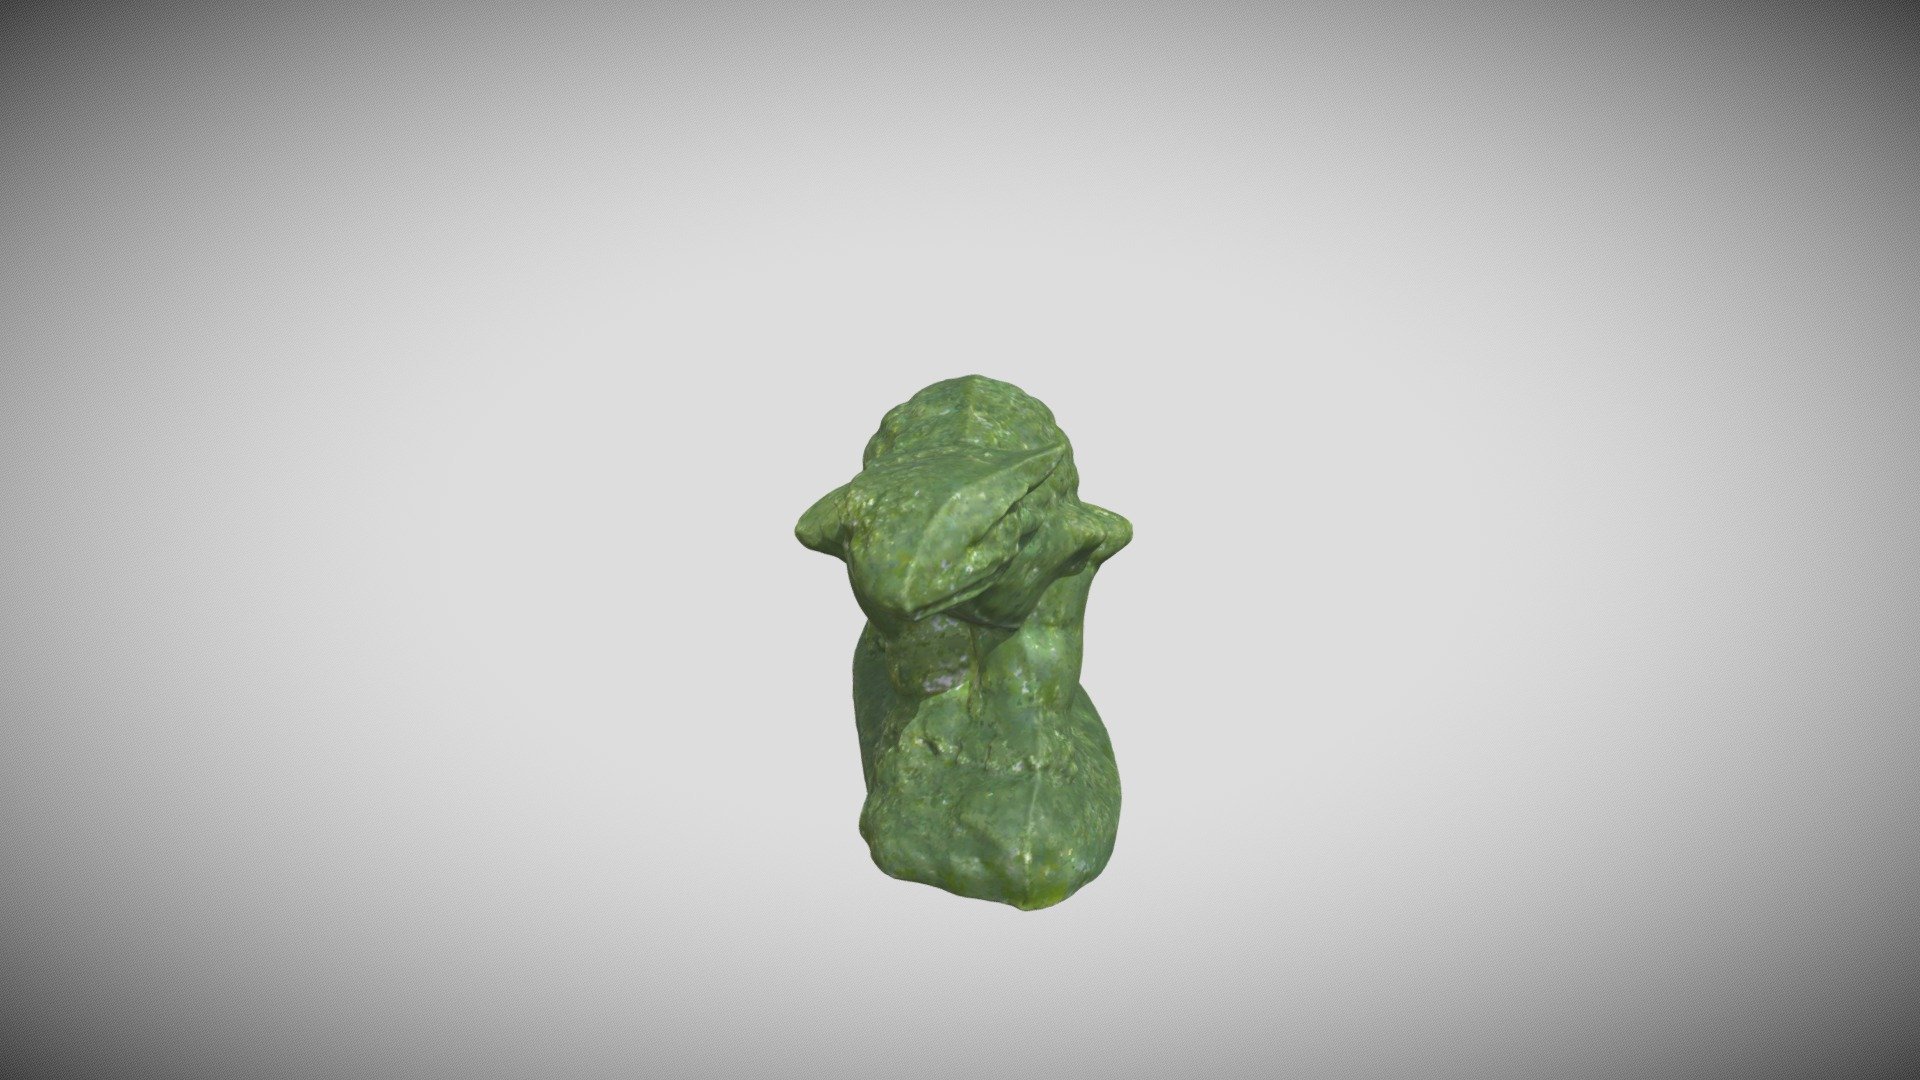 This figurine was generated with a Mold-A-Rama machine at the Field Museum in Chicago, Illinois on April 1, 2022. It was 3D scanned with a NextEngine Desktop 3D scanner 3d model